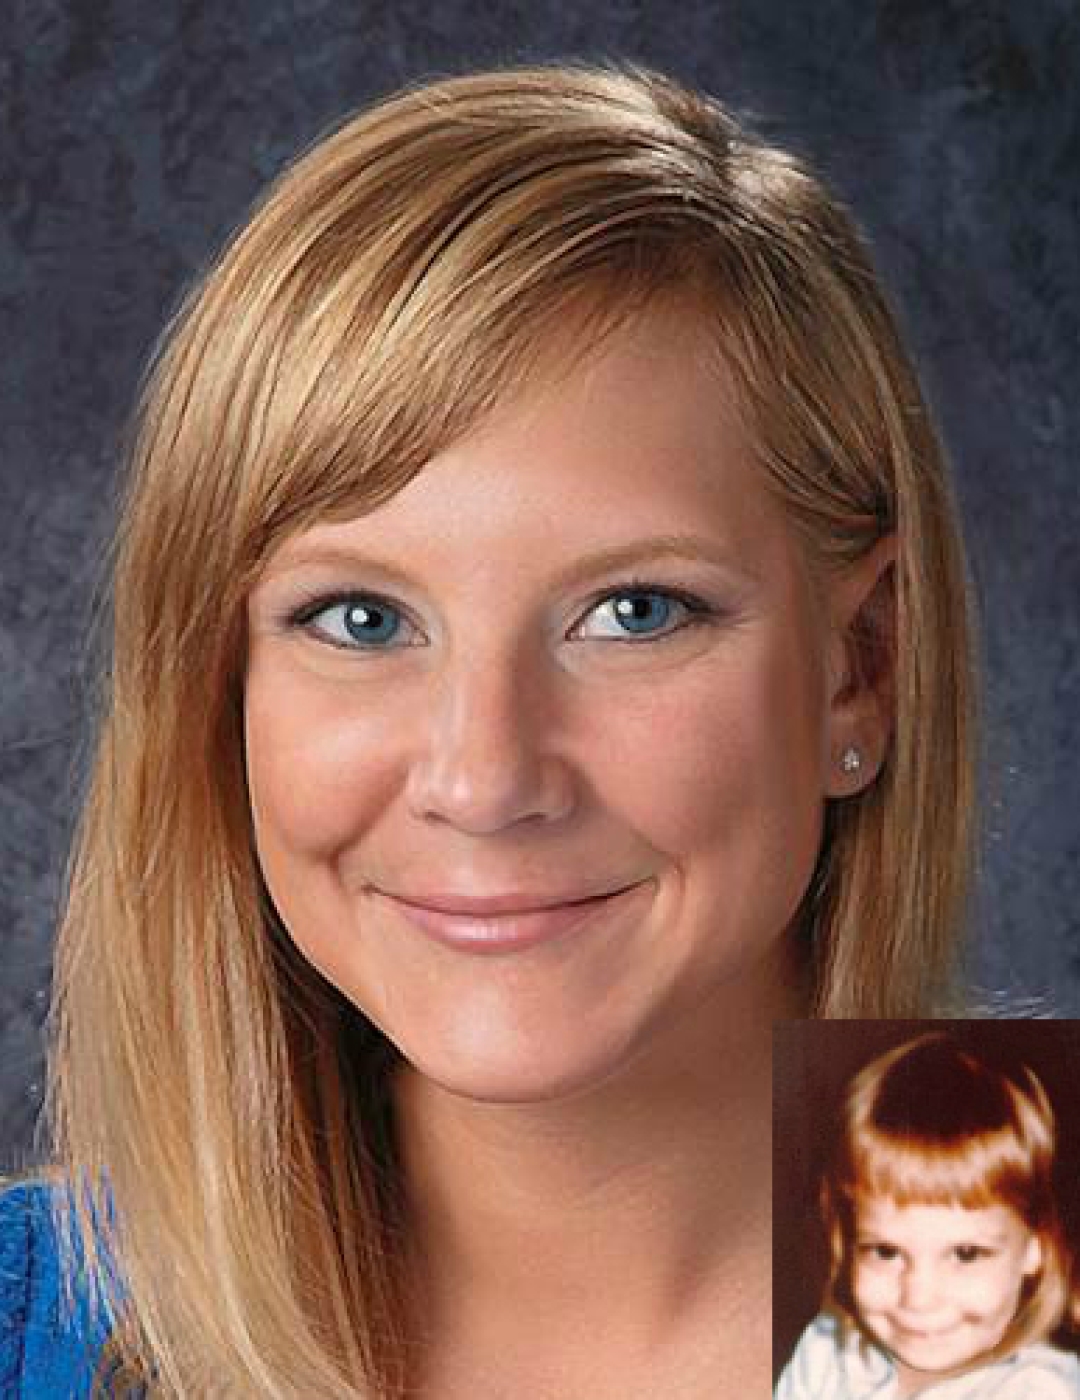 Amber Nichole Crum. Missing child with blonde hair and blue eyes. Age progressed photo shows what Amber looks like at 35 years old: an adult woman with long blonde hair, blue eyes, and side bangs.